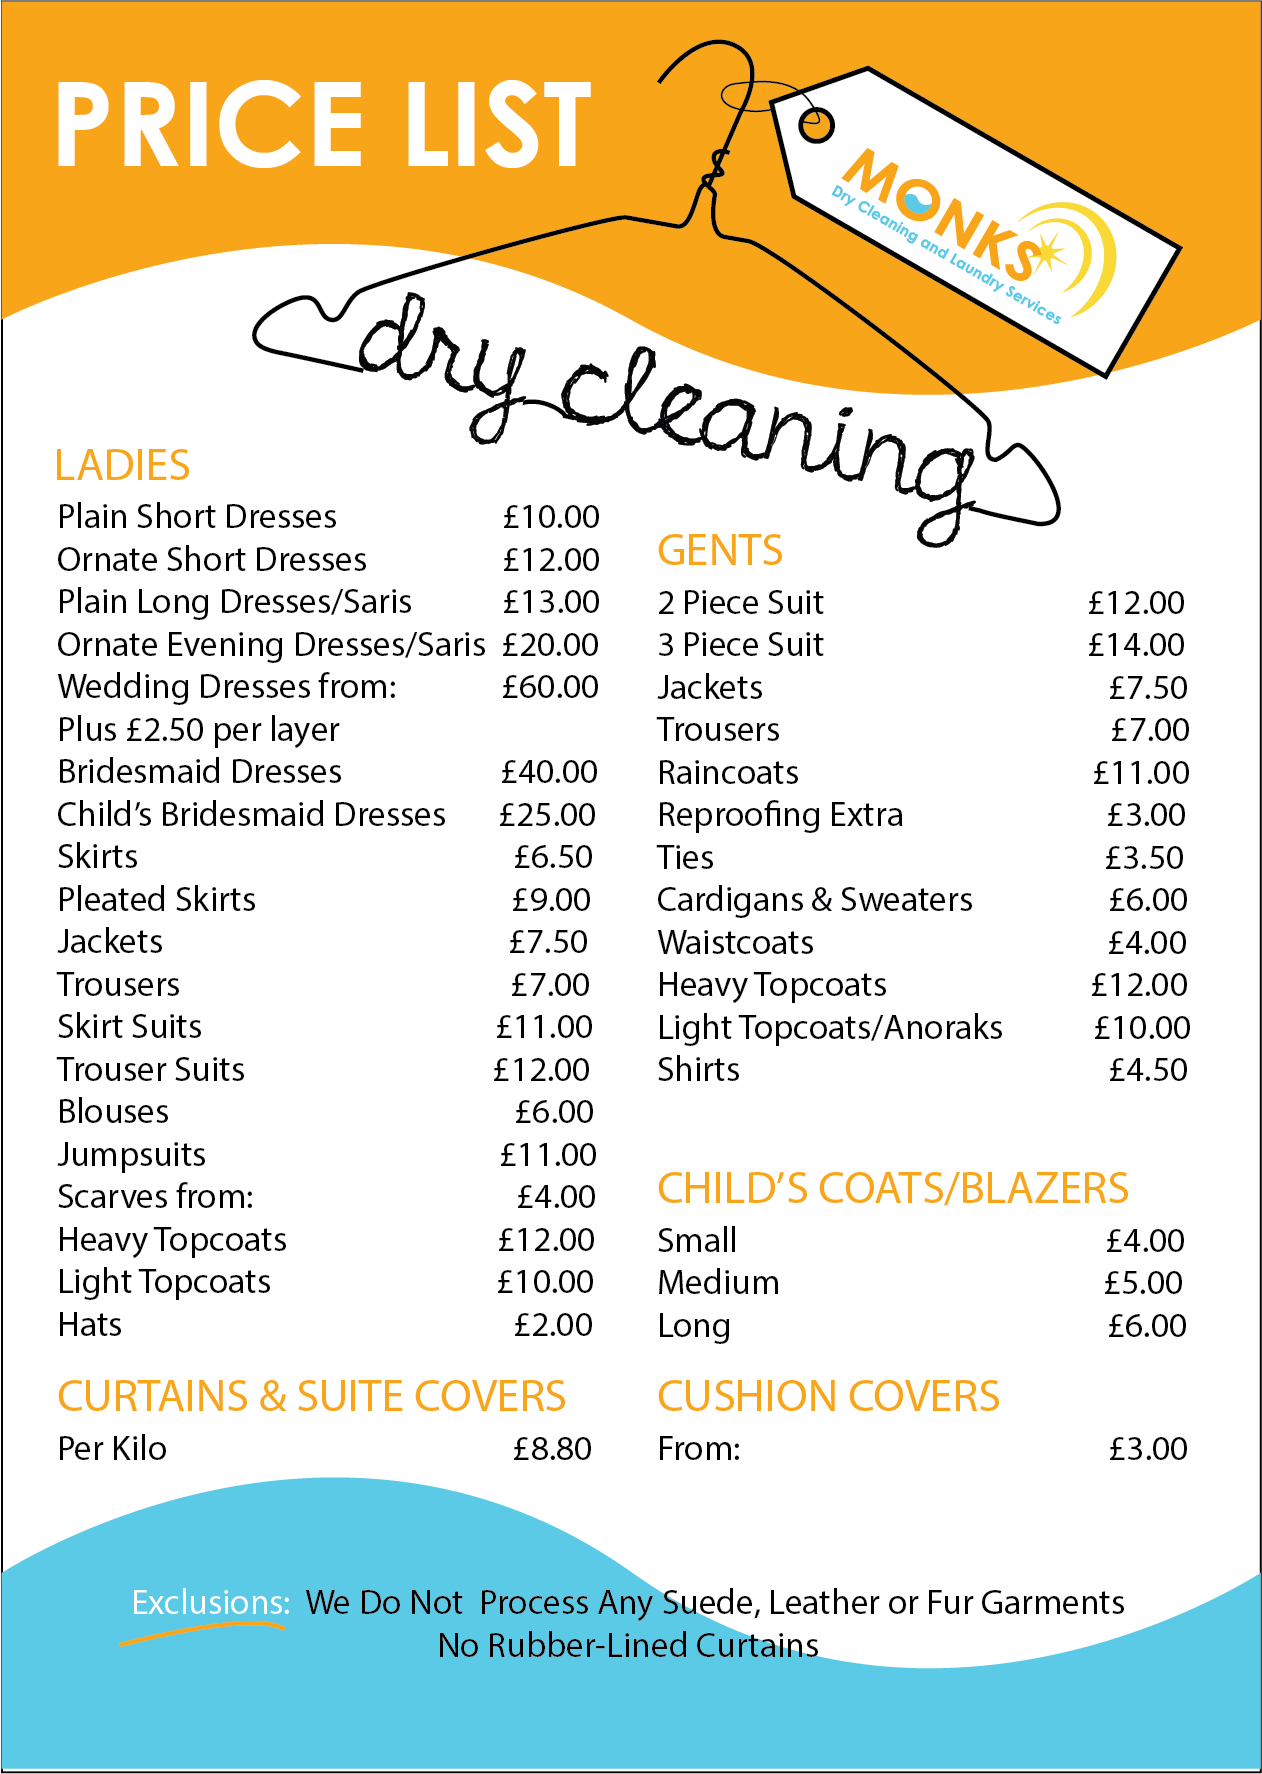 Typical Dry Cleaning Prices